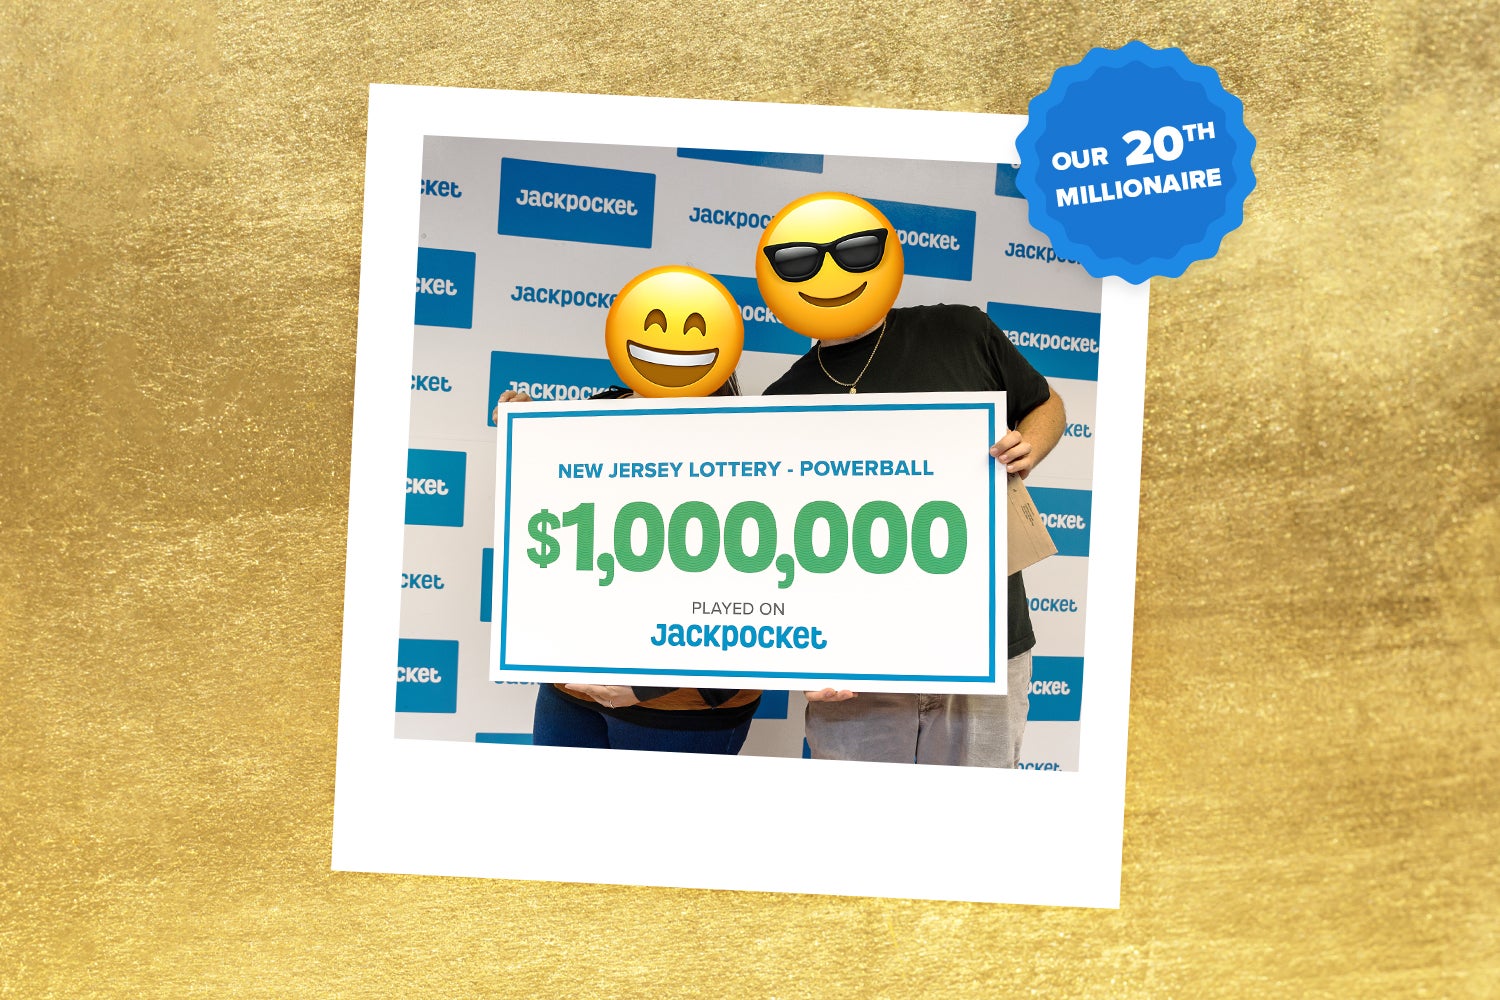 New Jersey Couple Wins $1,000,000 on Jackpocket